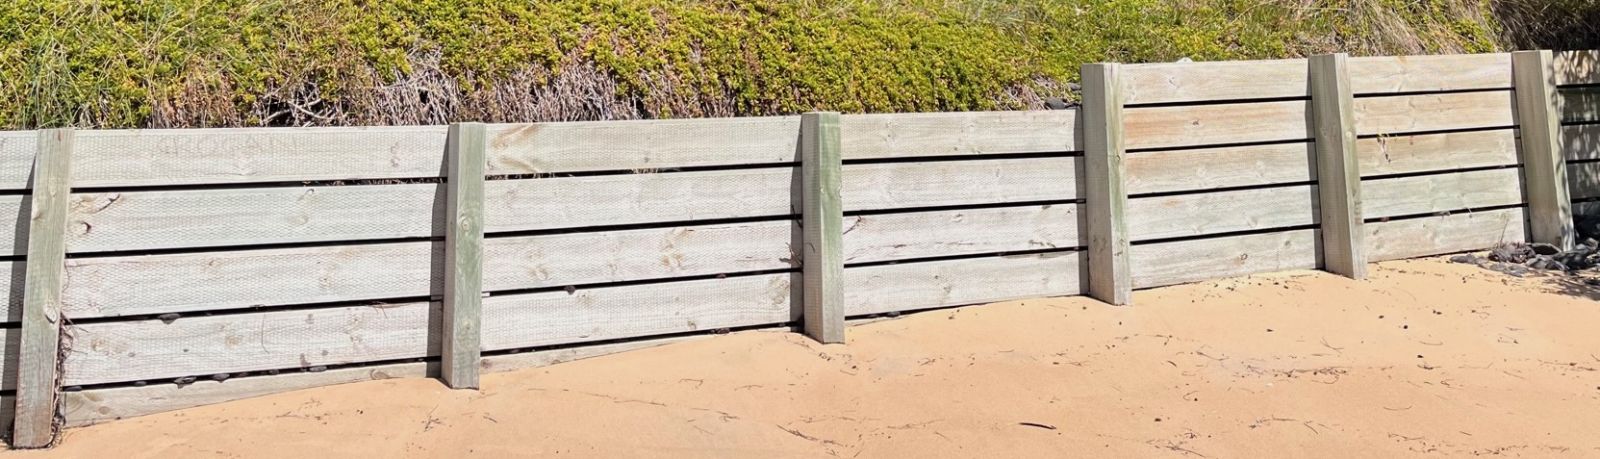 What railway sleepers are best for a retaining wall. Railwaysleepers.com